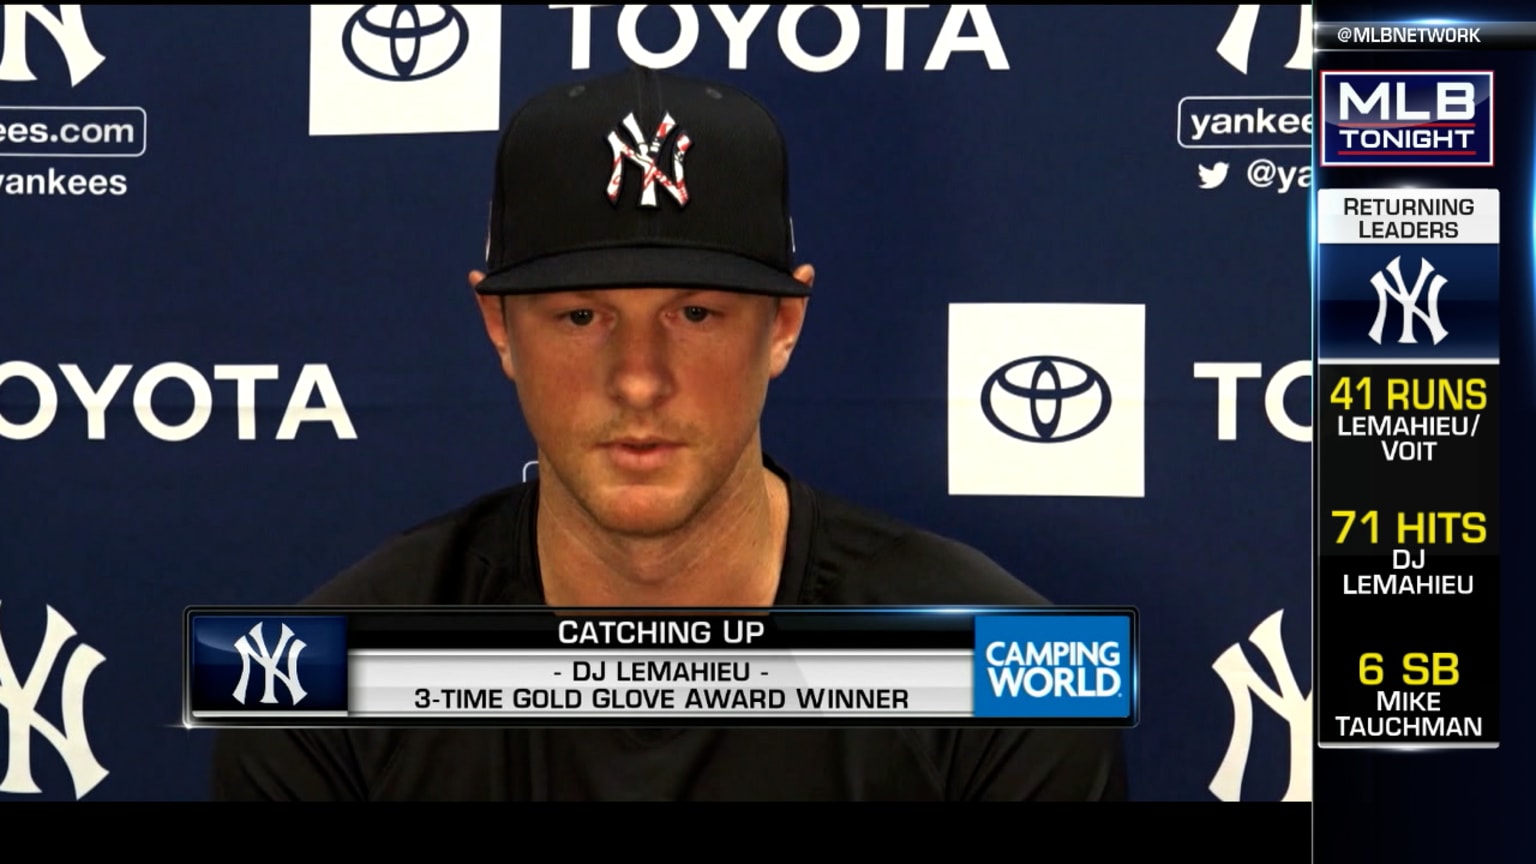 D.J. LeMahieu Speaking Fee and Booking Agent Contact